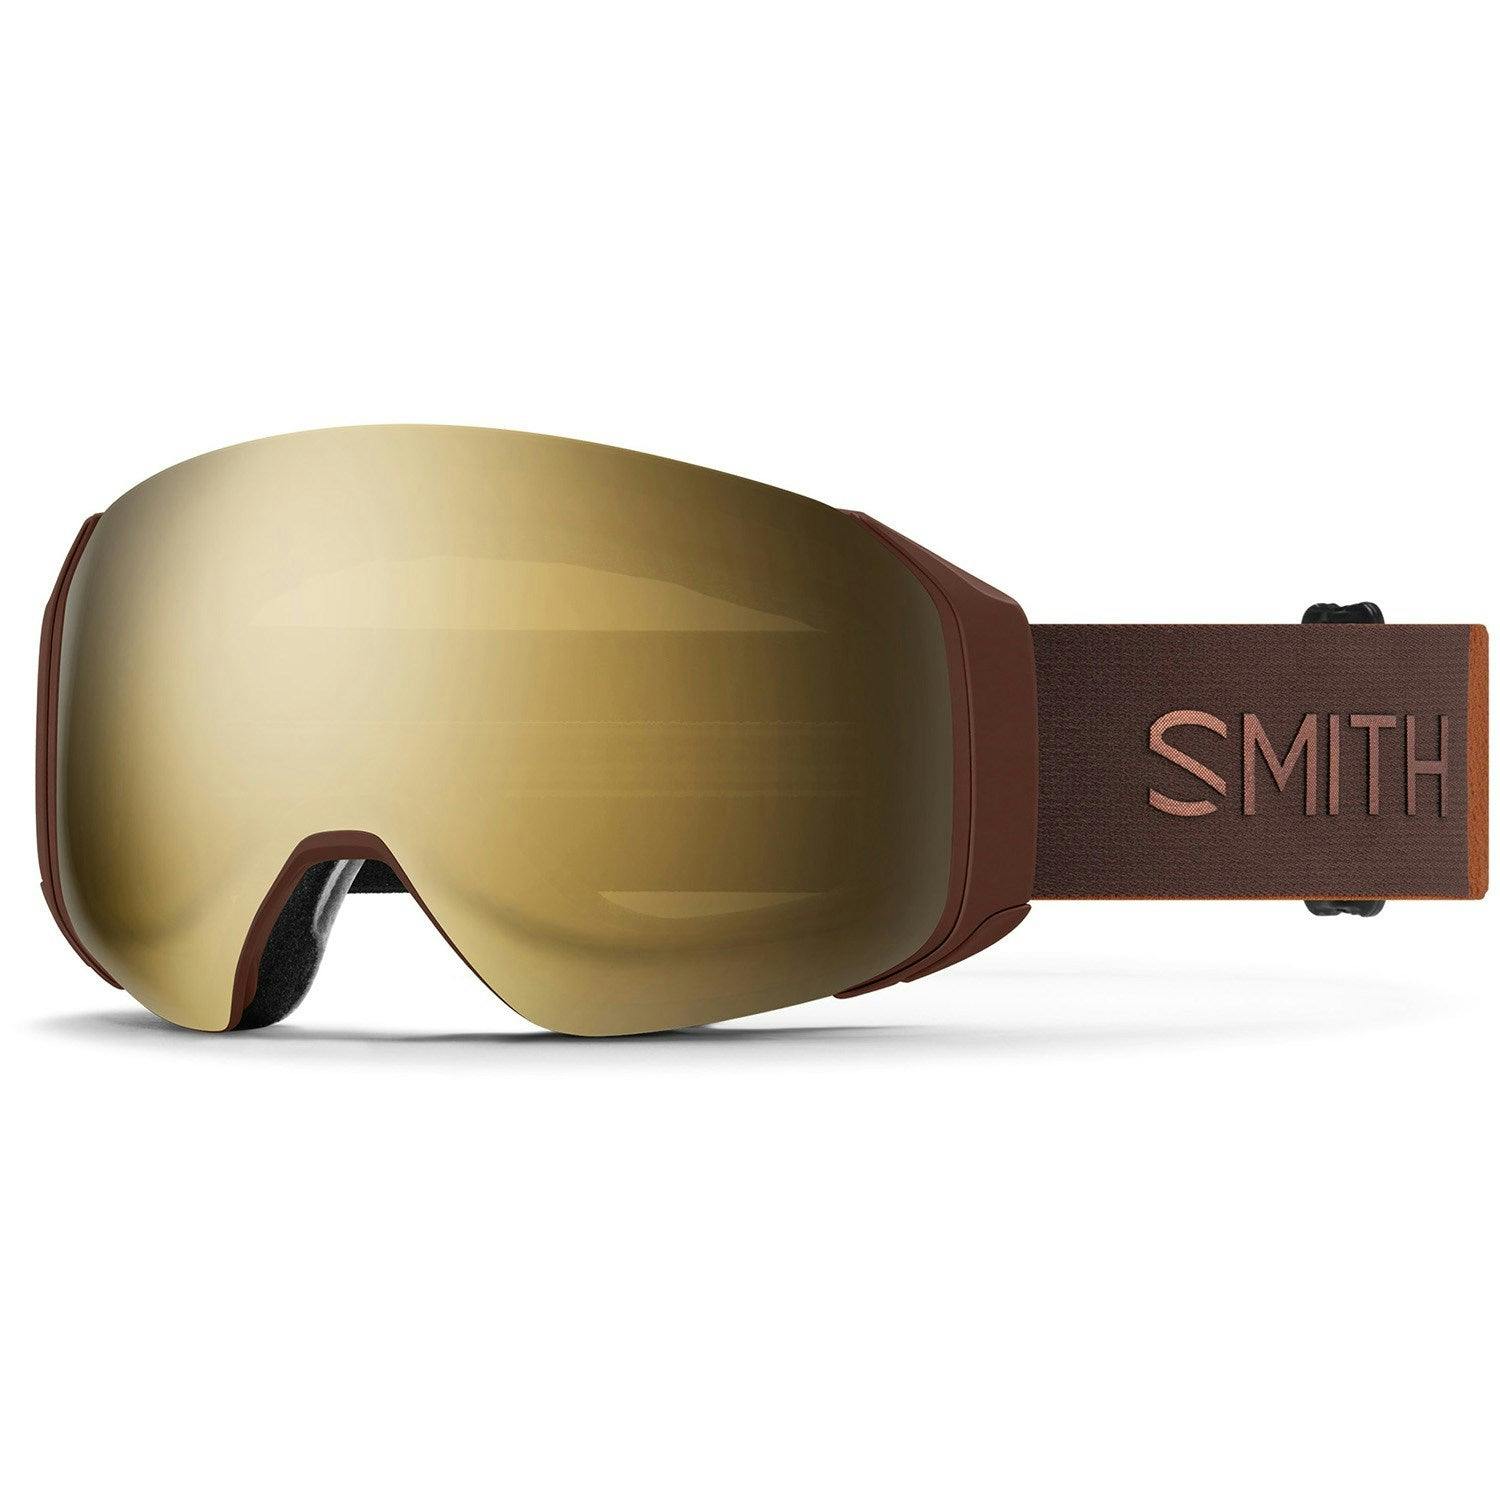 Smith 4d MAG S Goggles